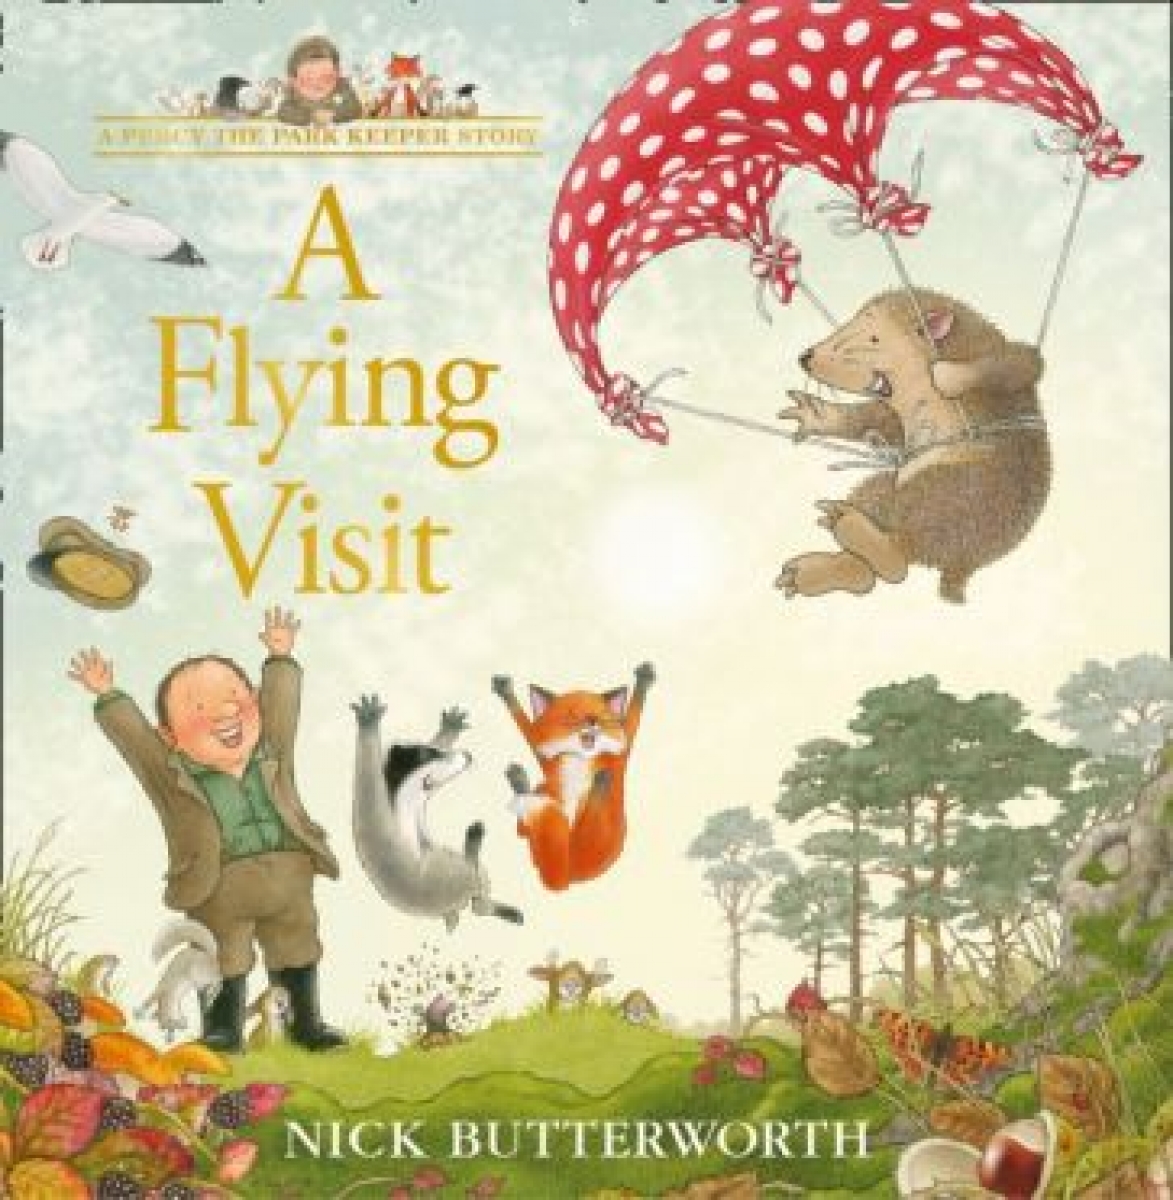 Butterworth Nick A Flying Visit 